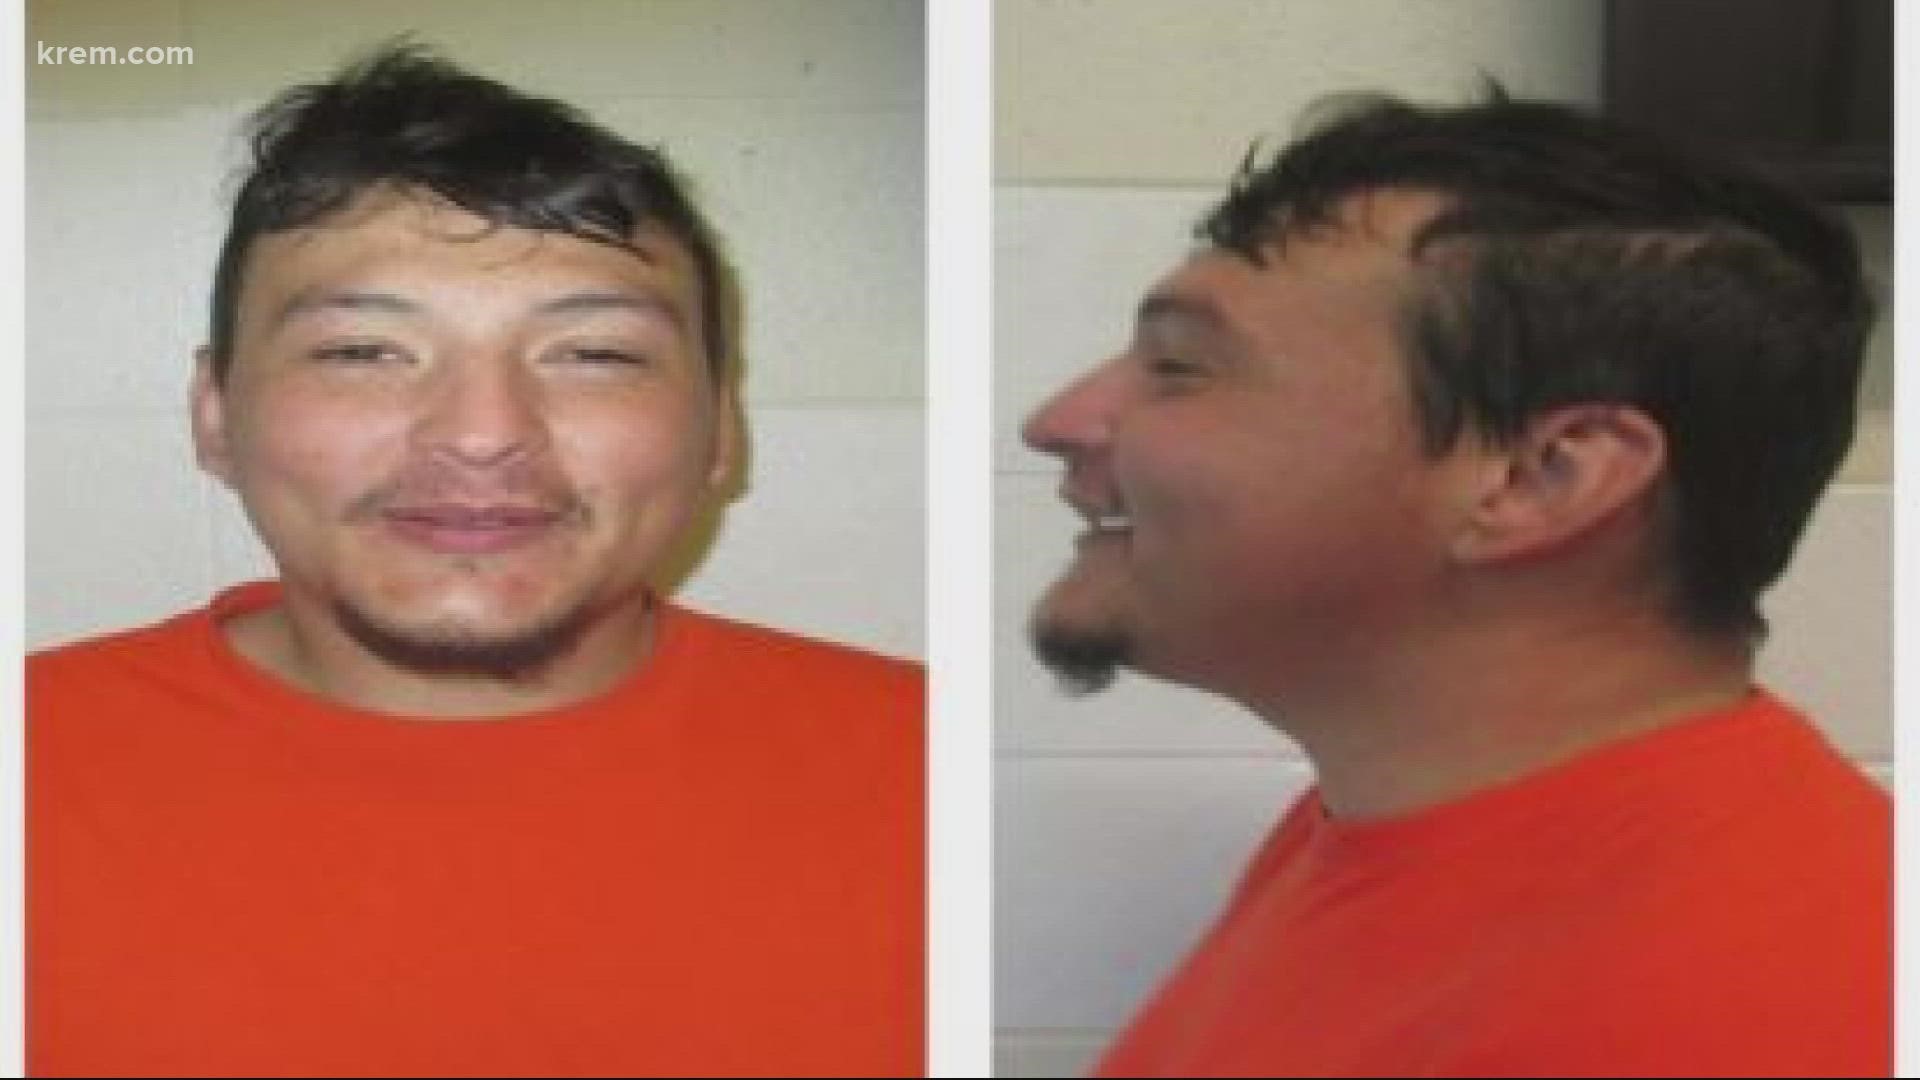 Amos Matthew Staggs escaped from the Colville Tribal Police correctional facility on May 8. He was last seen in Yakima.